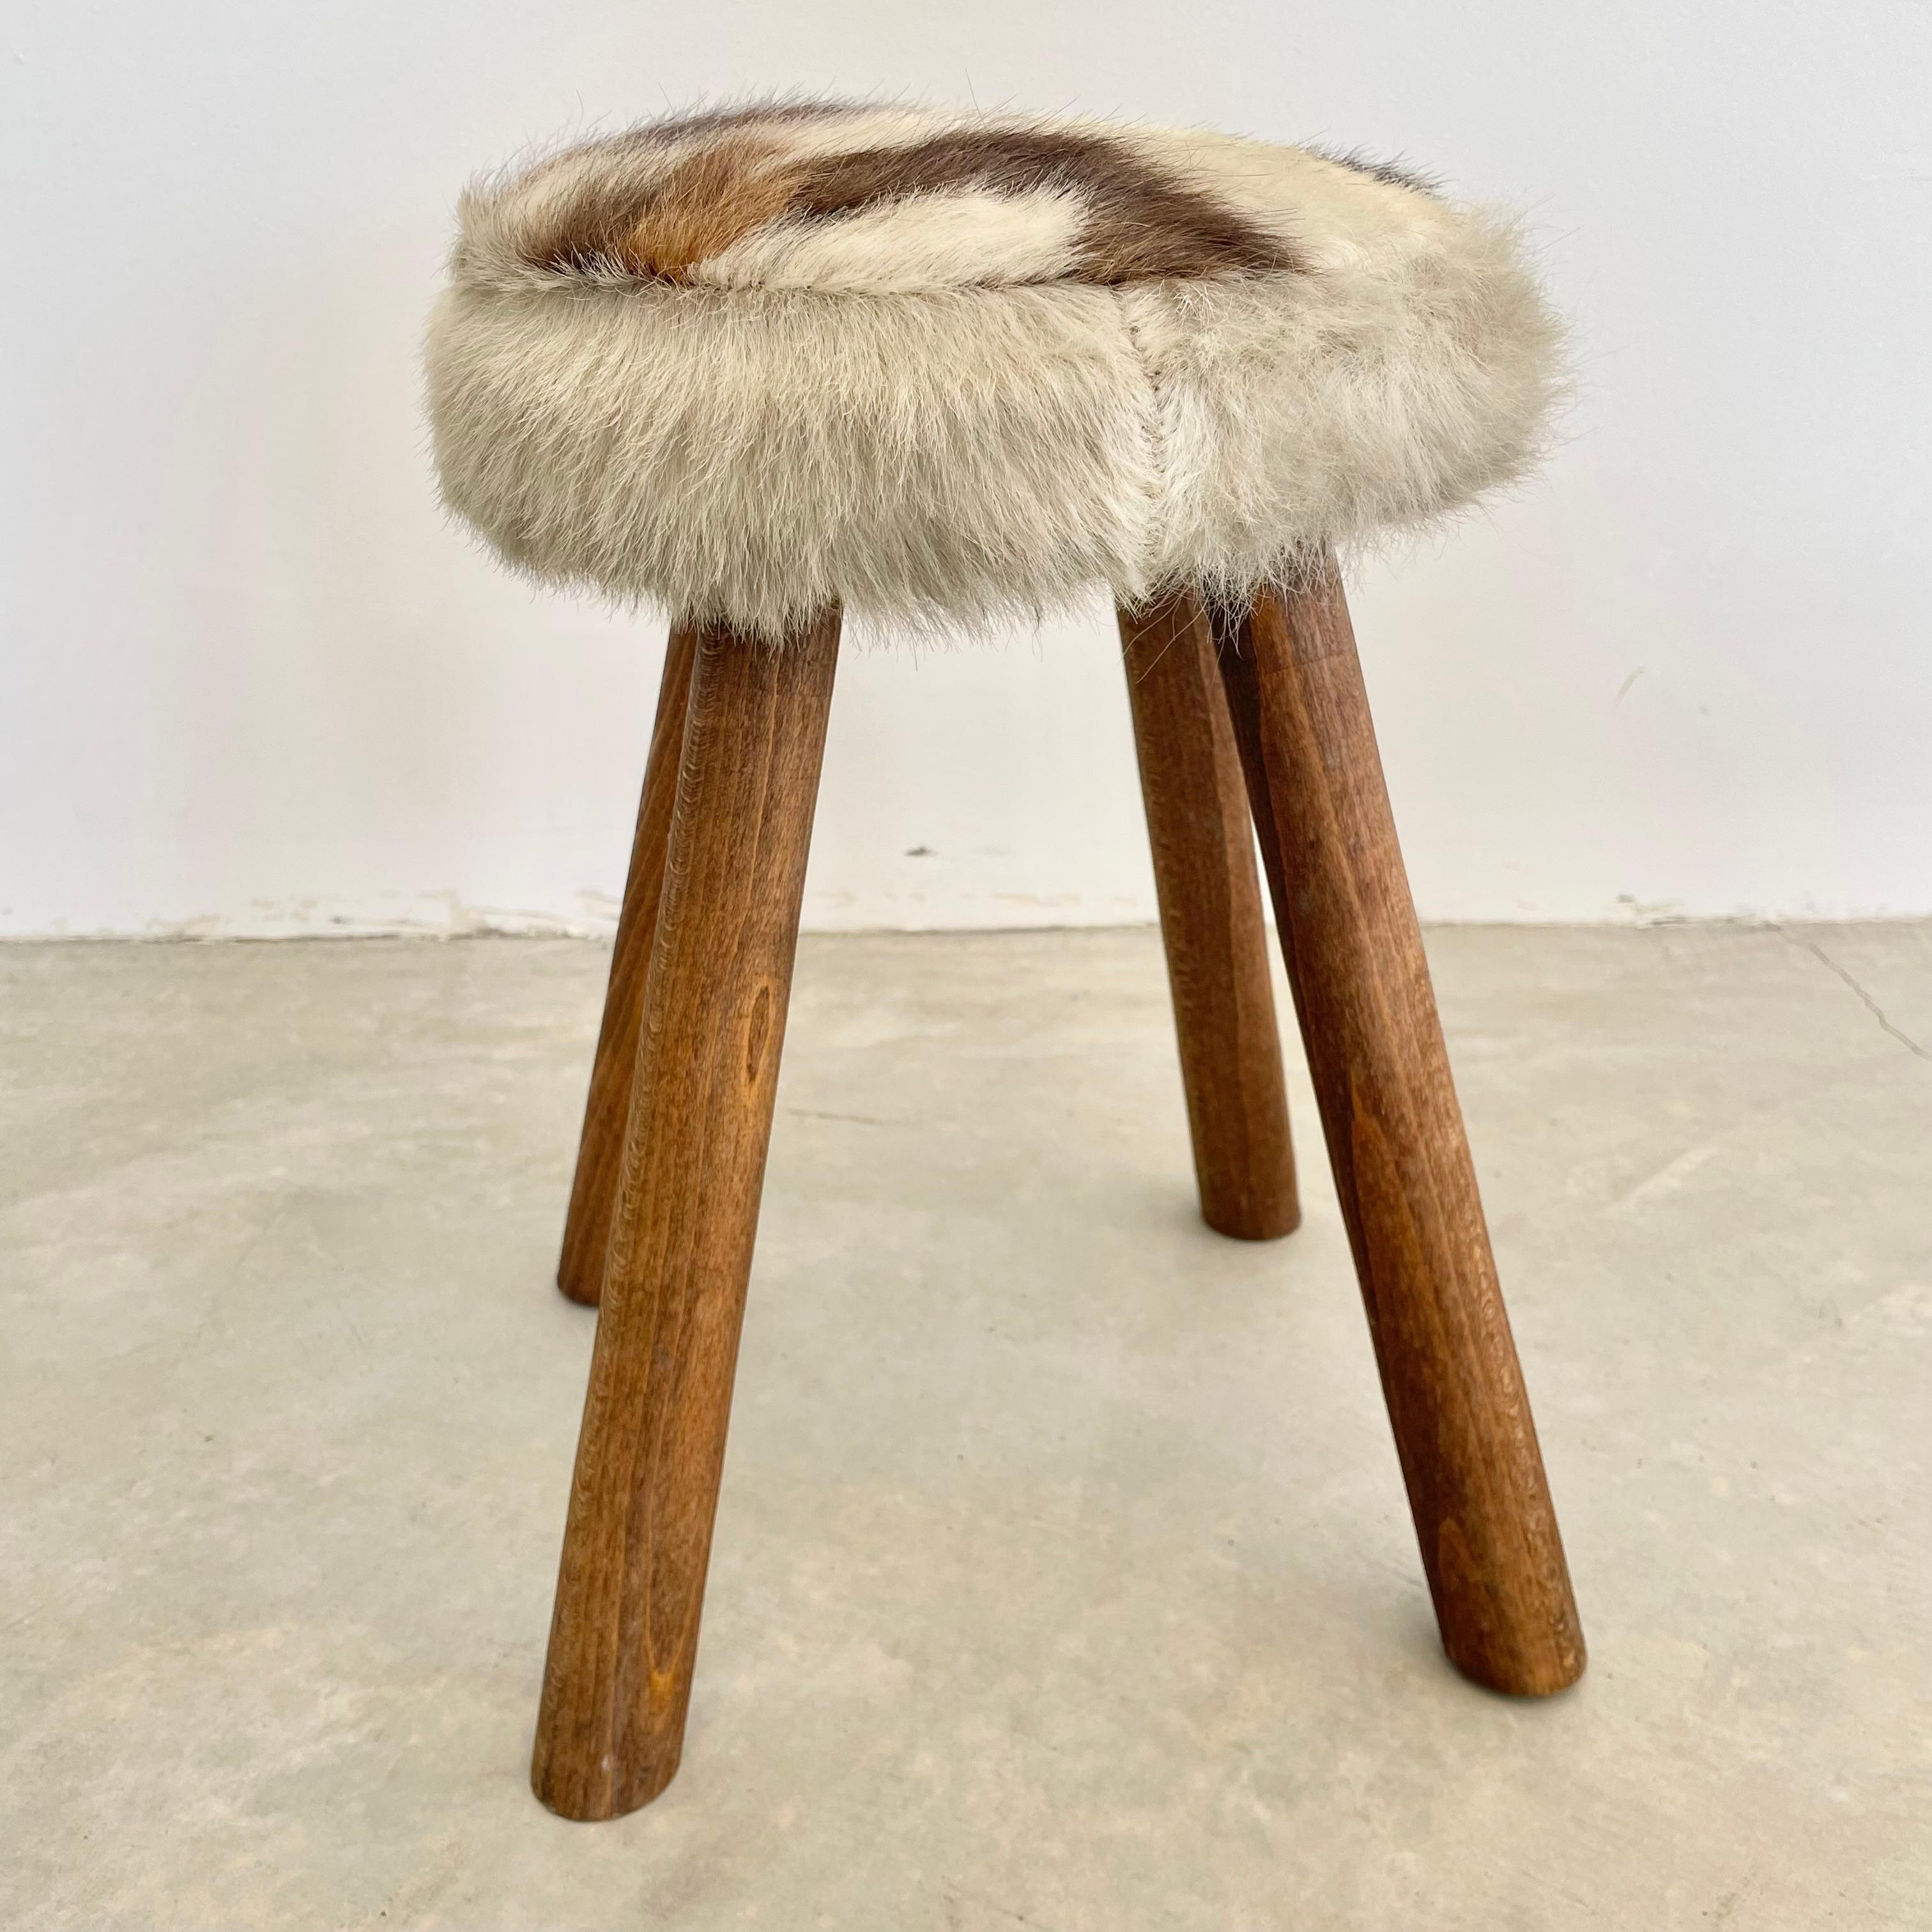 Unique 4 legged stool made in France, circa 1960s. Substantial and chunky round seat covered in a cushion and thick cowhide with spotted fur ranging from cream to tan and brown. Fur still in good condition with some soiling and minimal breakage to